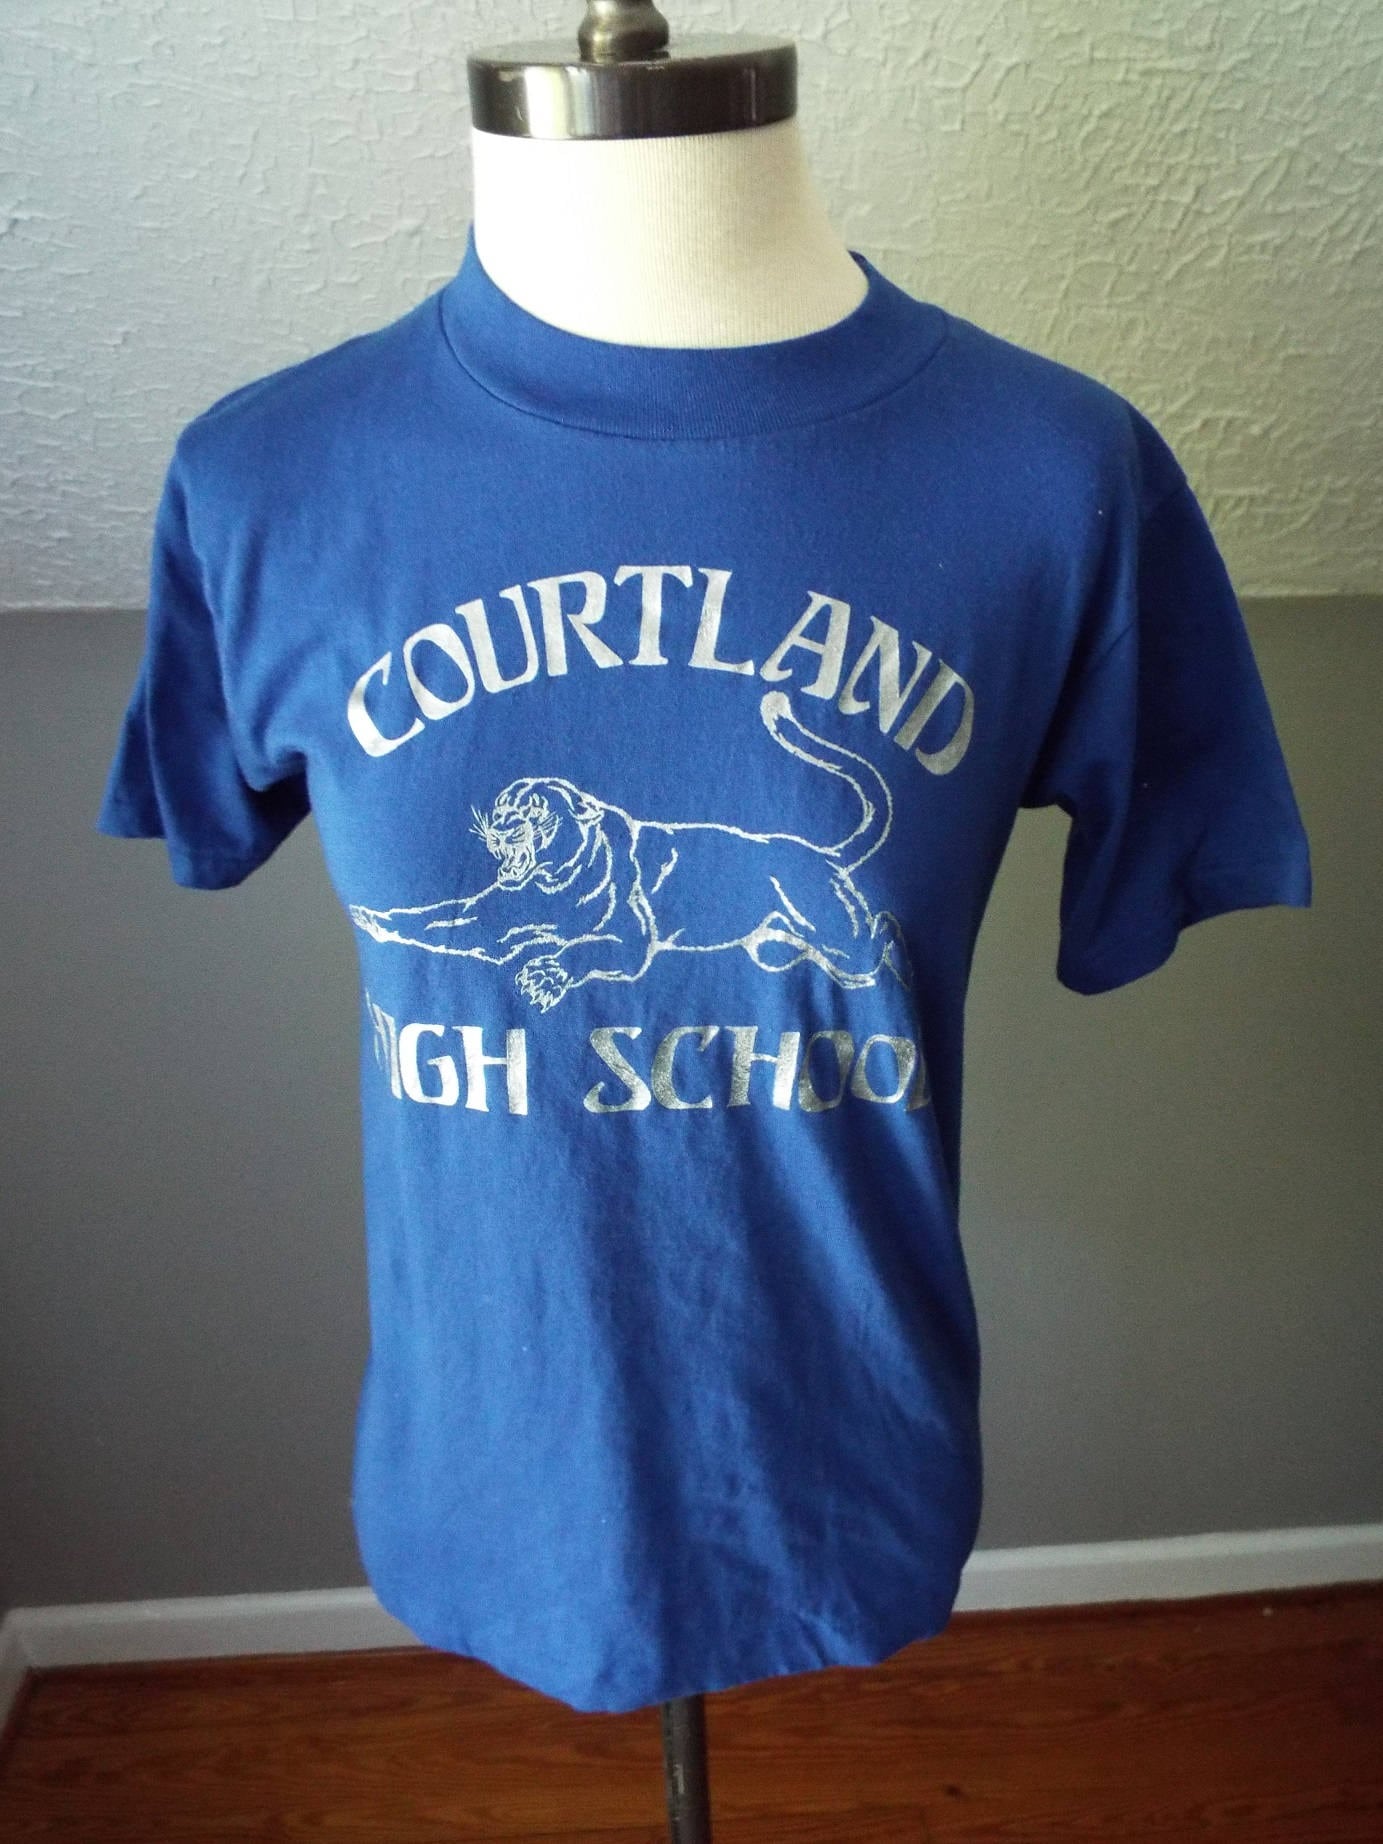 Vintage DEAD STOCK Short Sleeve Courtland Hight School T-Shirt by Collegiate Pacific